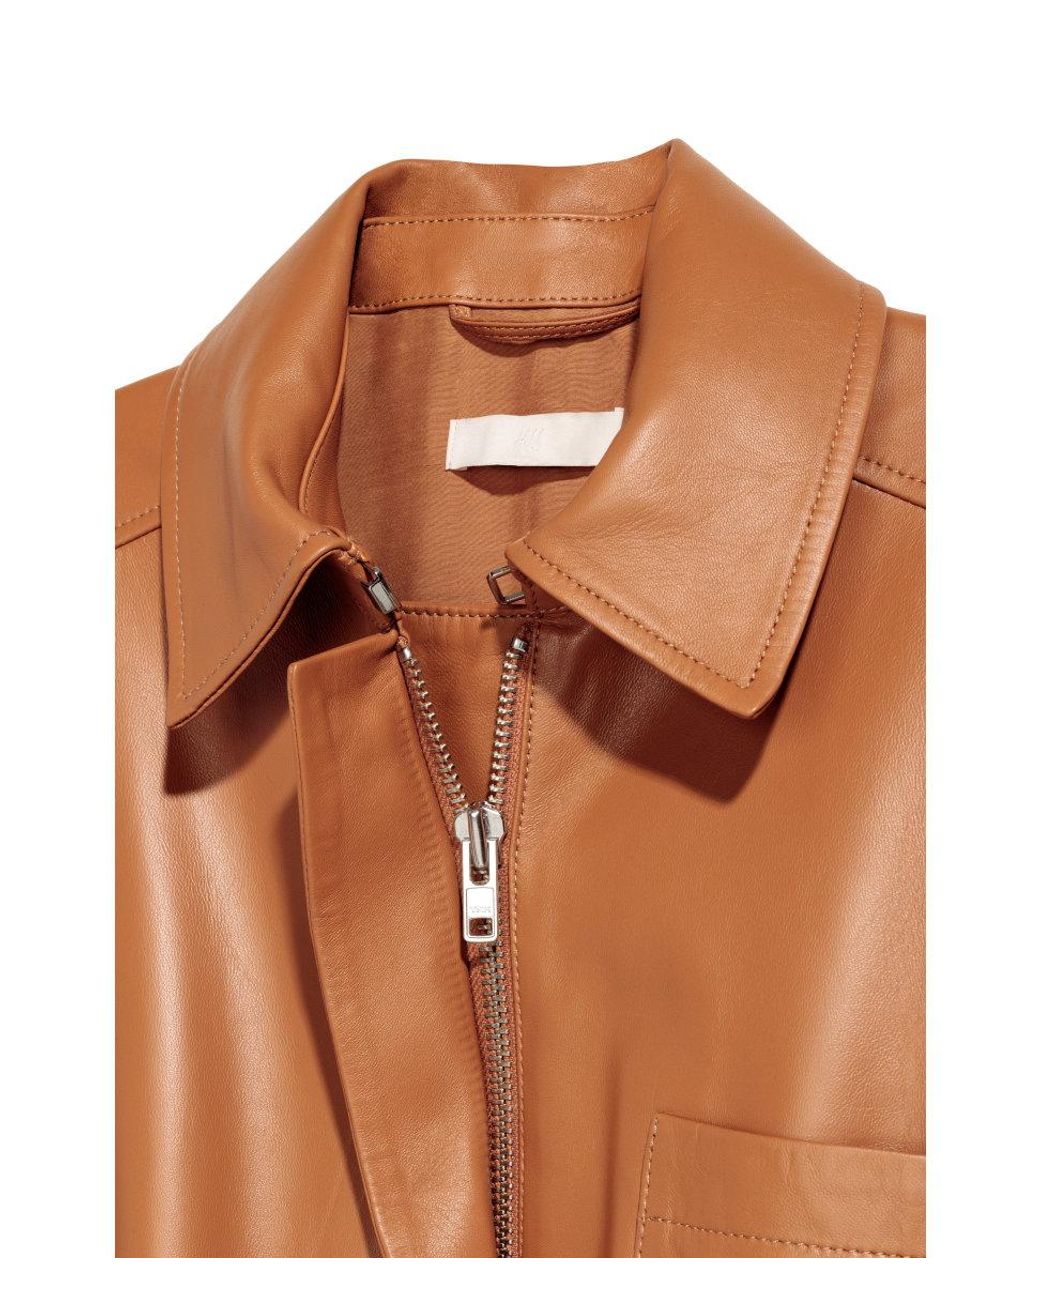 H&M Leather Jacket With A Tie Belt in Brown | Lyst